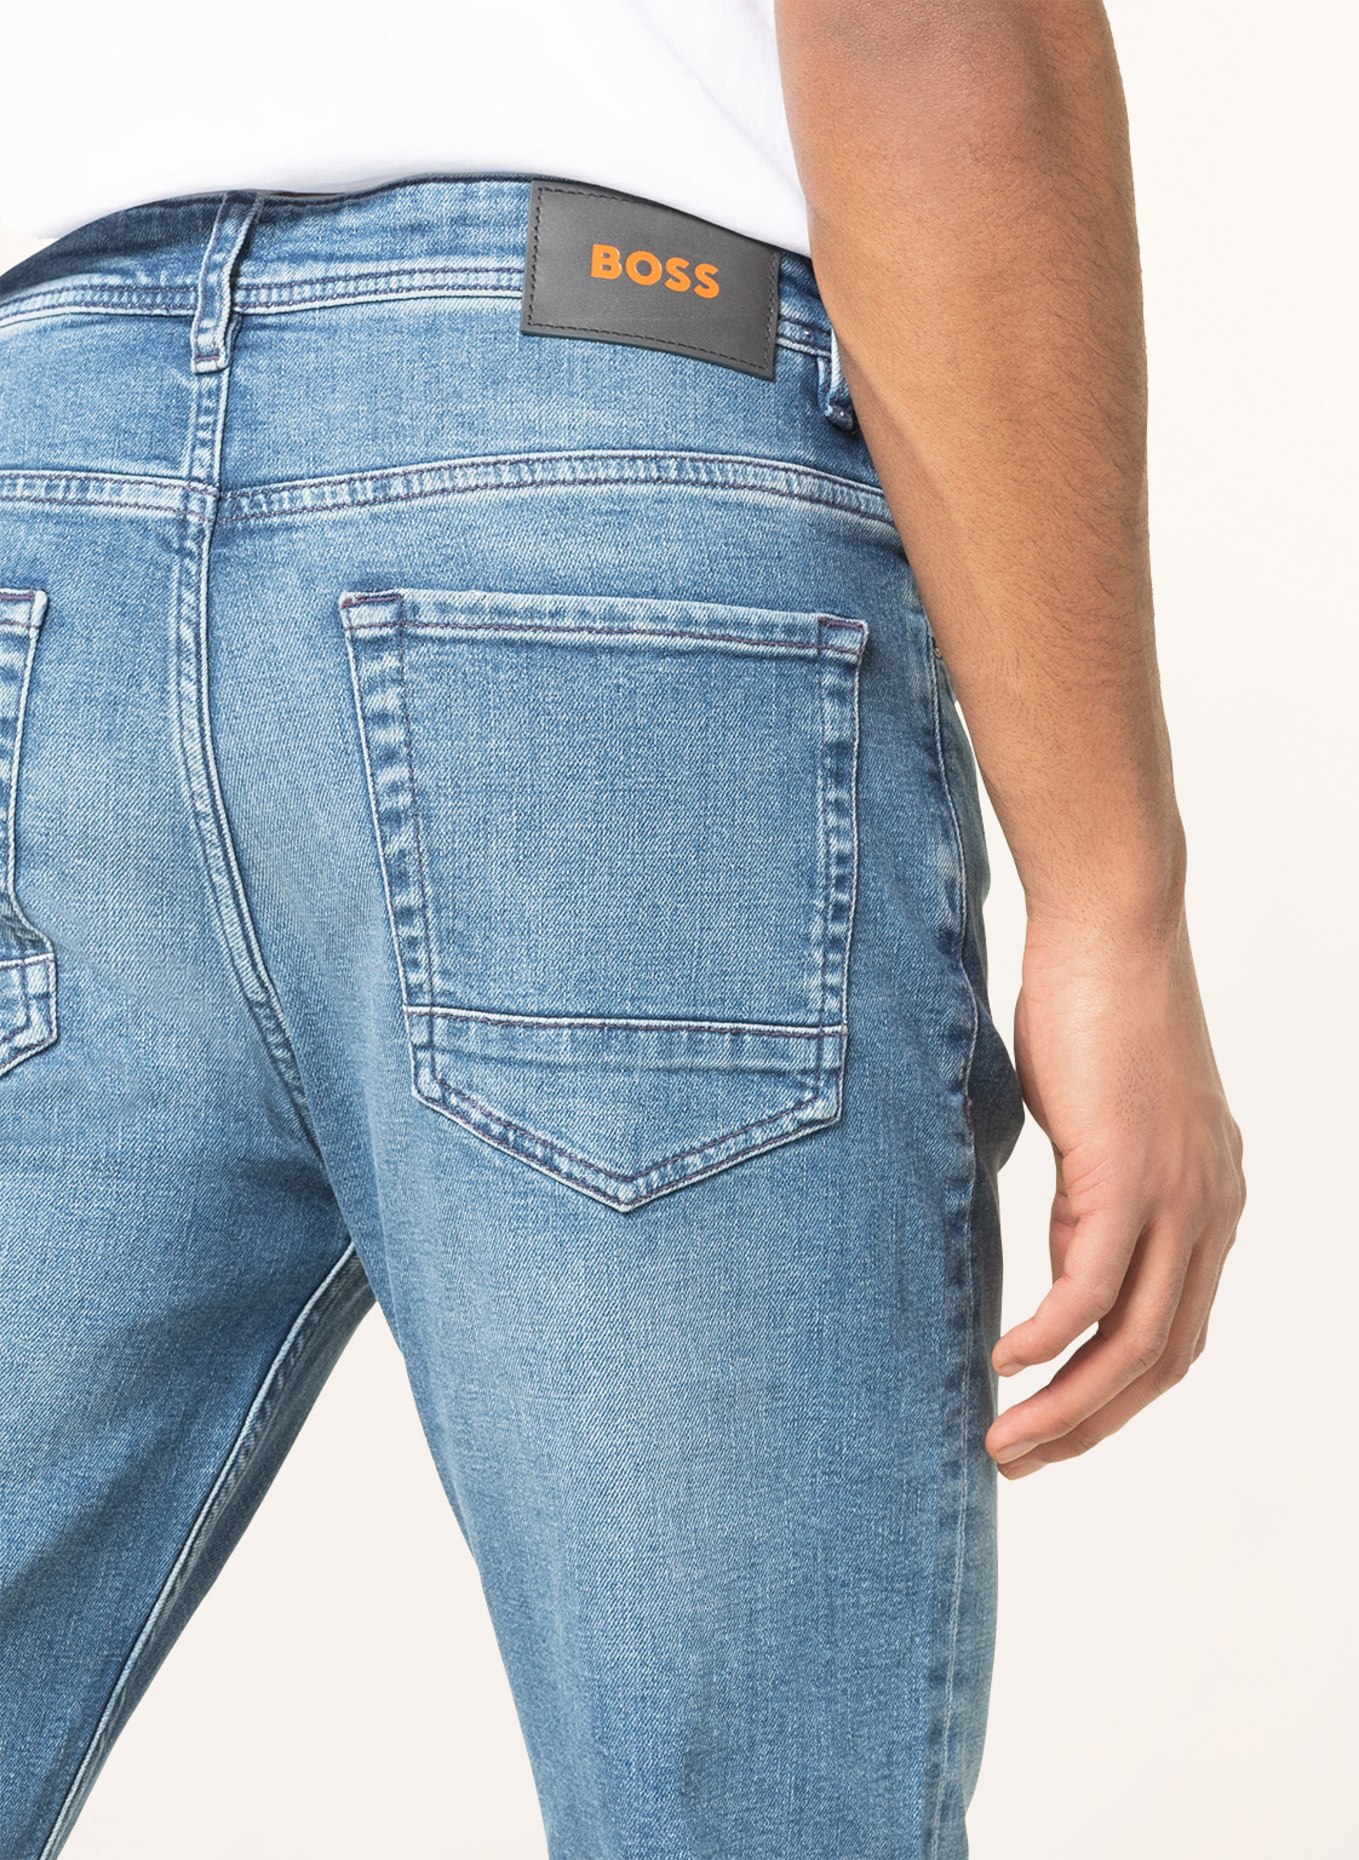 BOSS Jeans TABER Tapered Fit, Farbe: 436 BRIGHT BLUE (Bild 5)